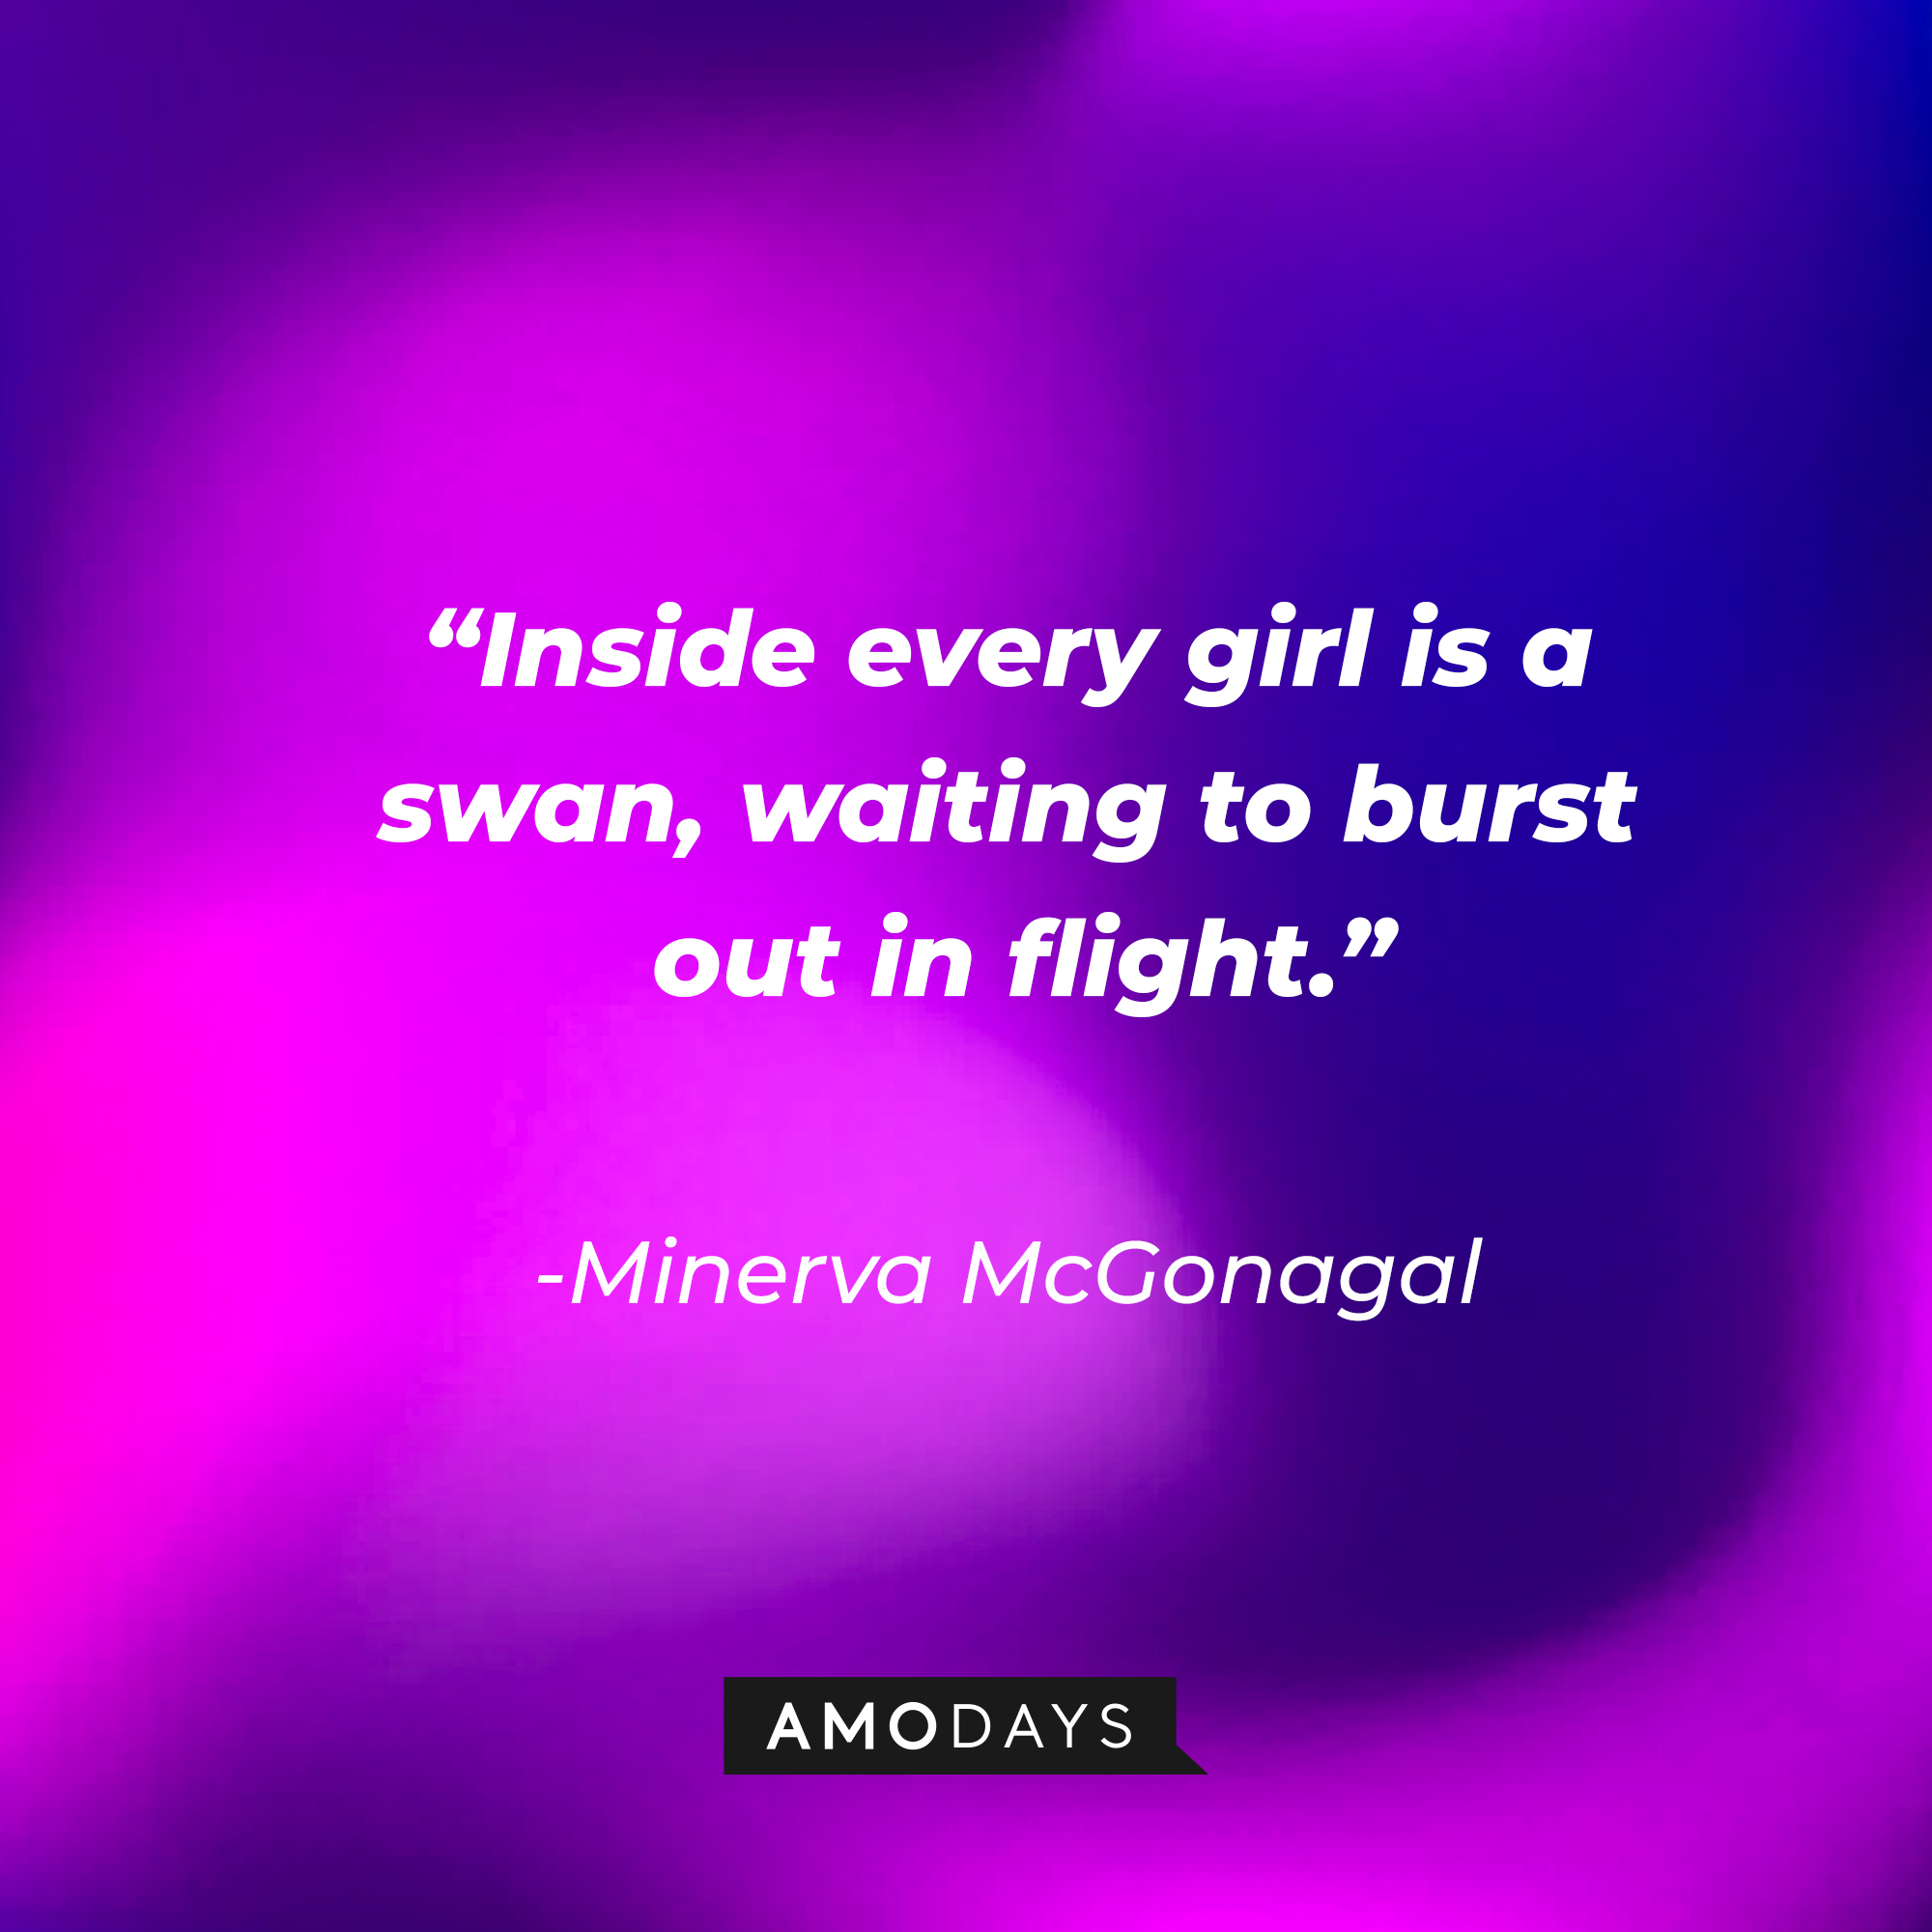 Minerva McGonagal's quote: “Inside every girl is a swan, waiting to burst out in flight.” | Image: Amodays